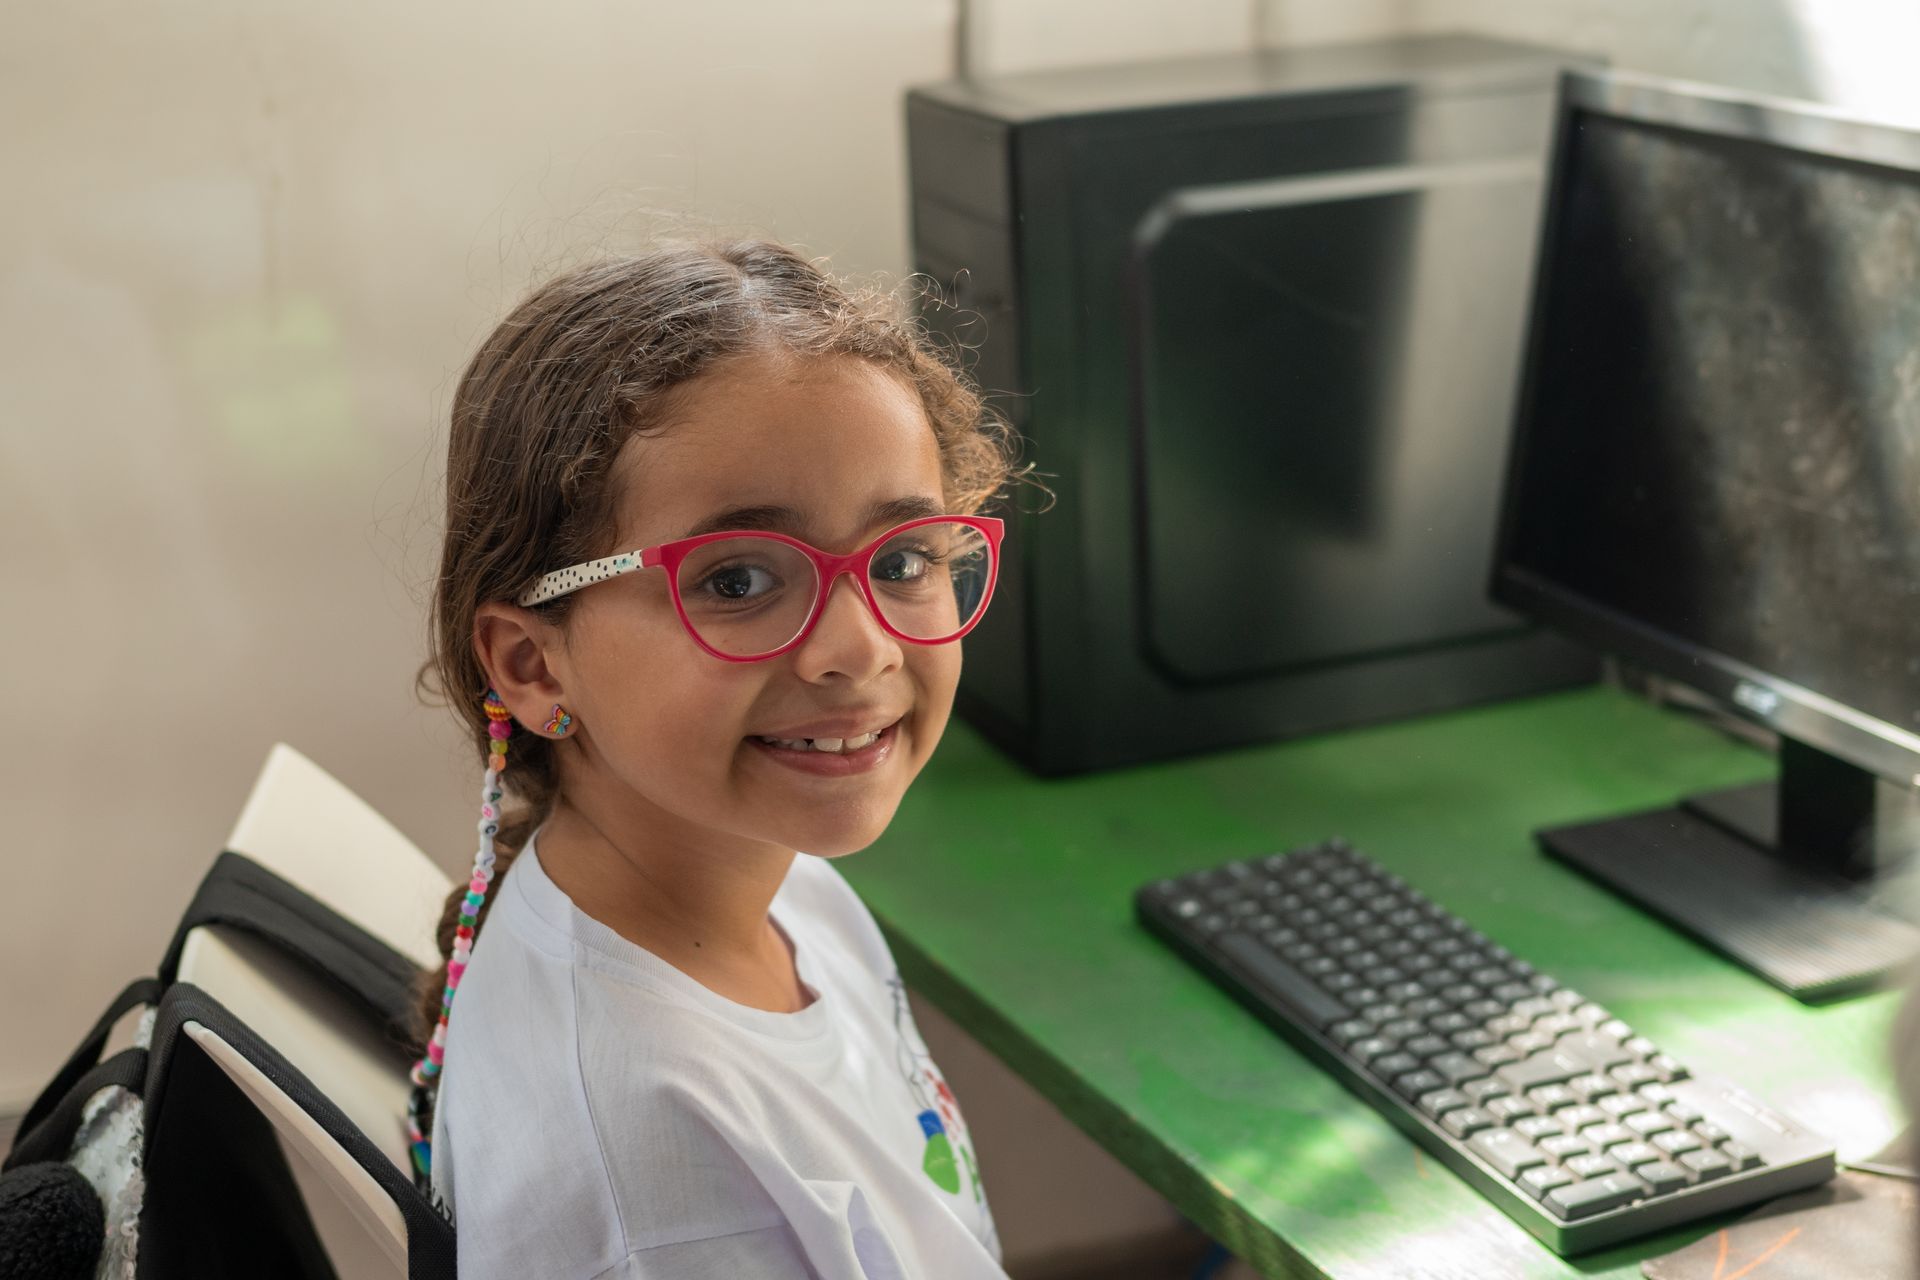 a little girl wearing glasses is sitting at a desk in front of a computer .